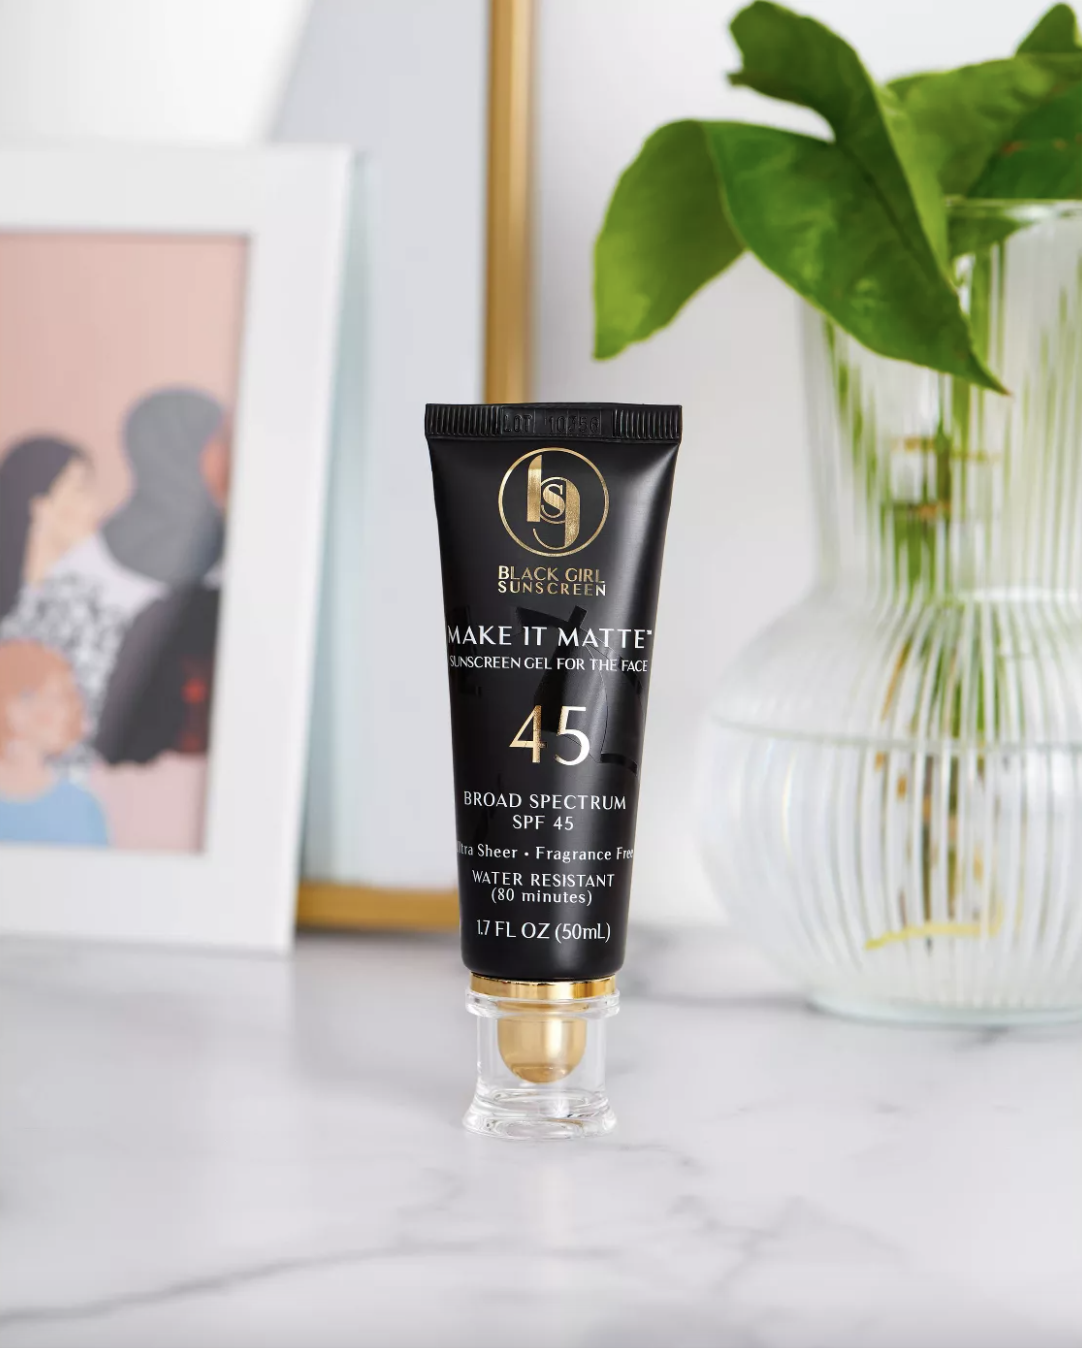 A tube of black girl sunscreen sitting on a counter in front of a plant and picture frame